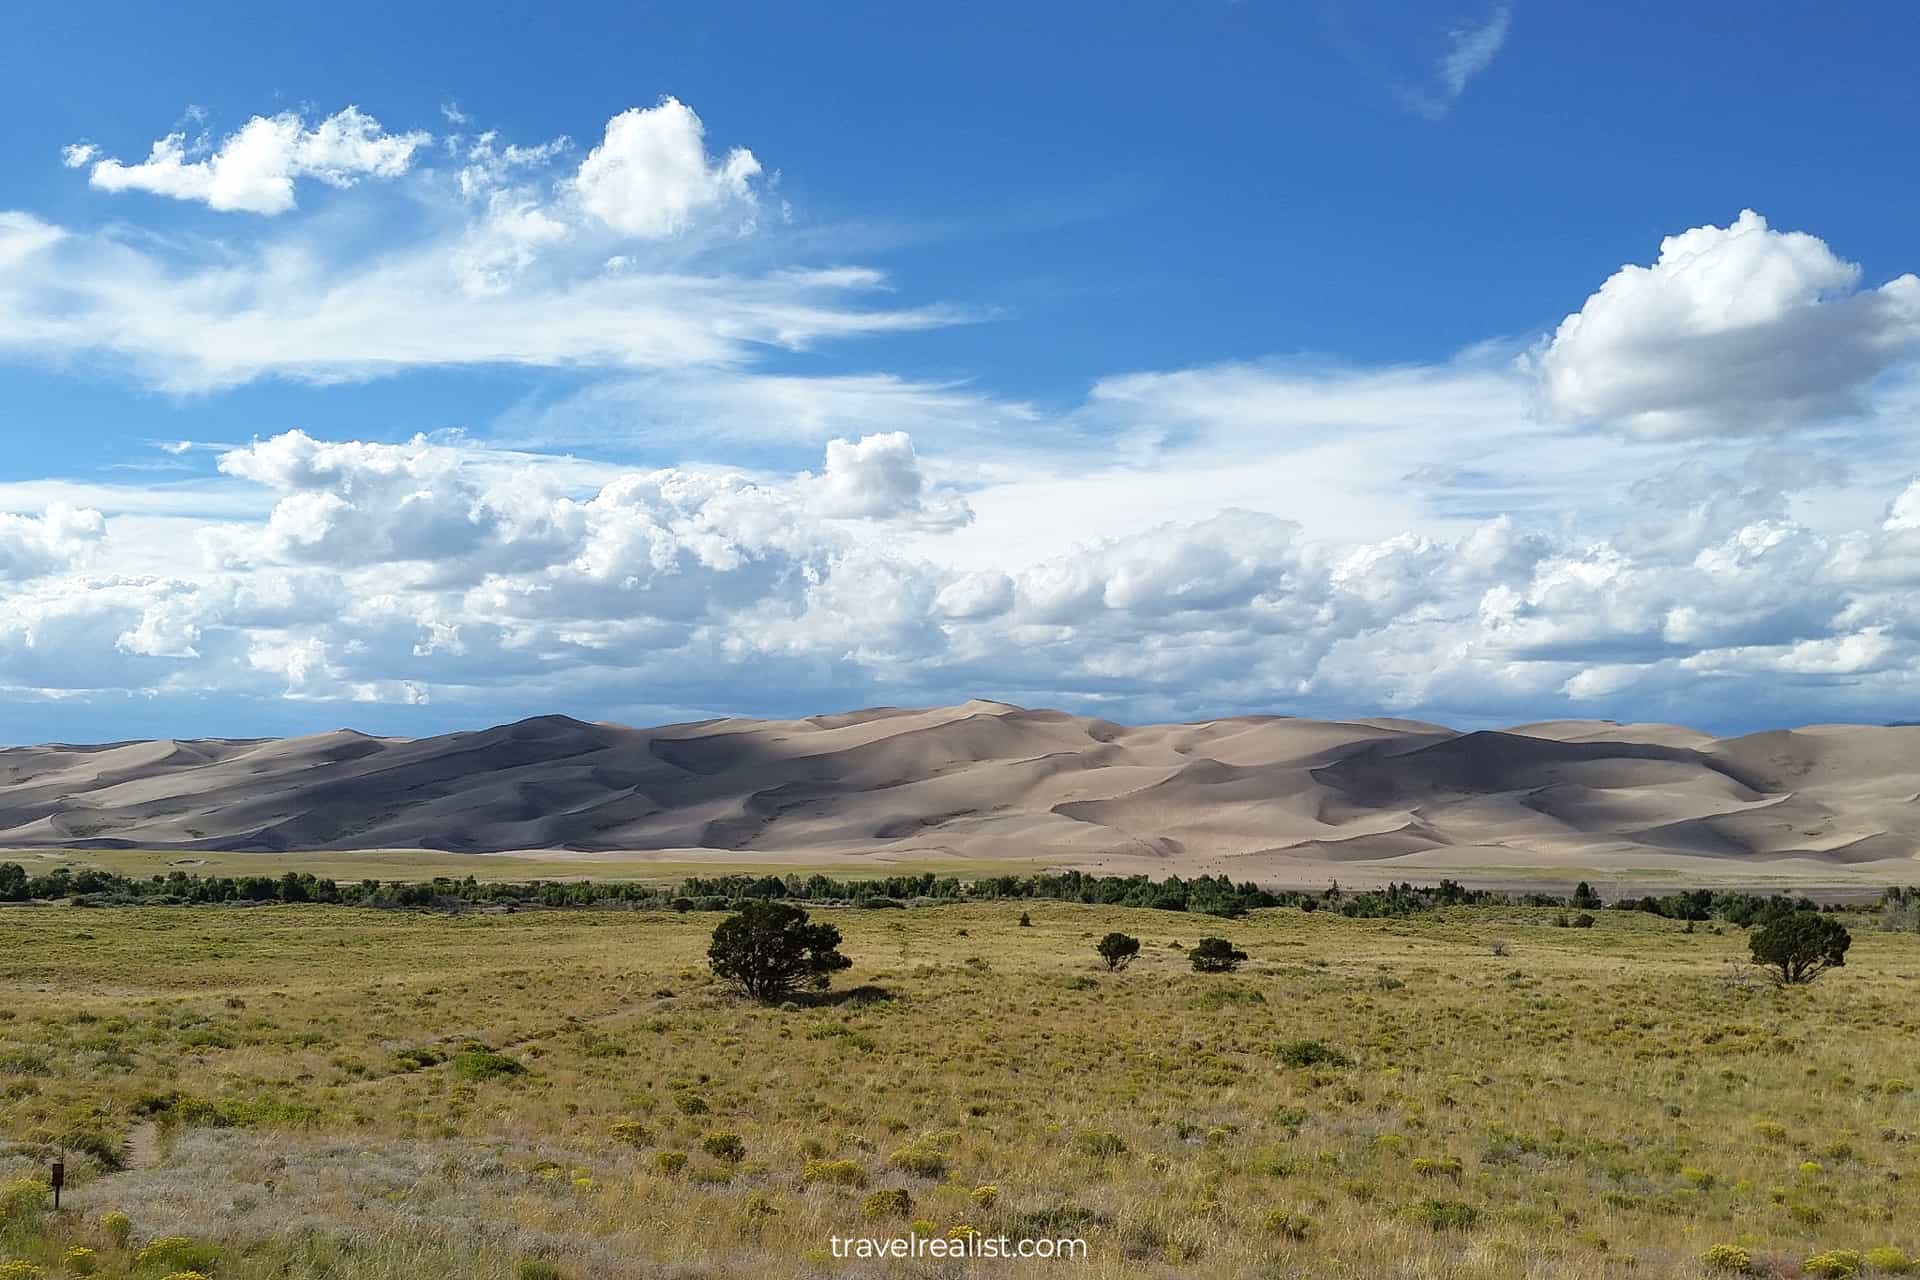 Sand dunes in Great Sand Dunes National Park, Colorado, US